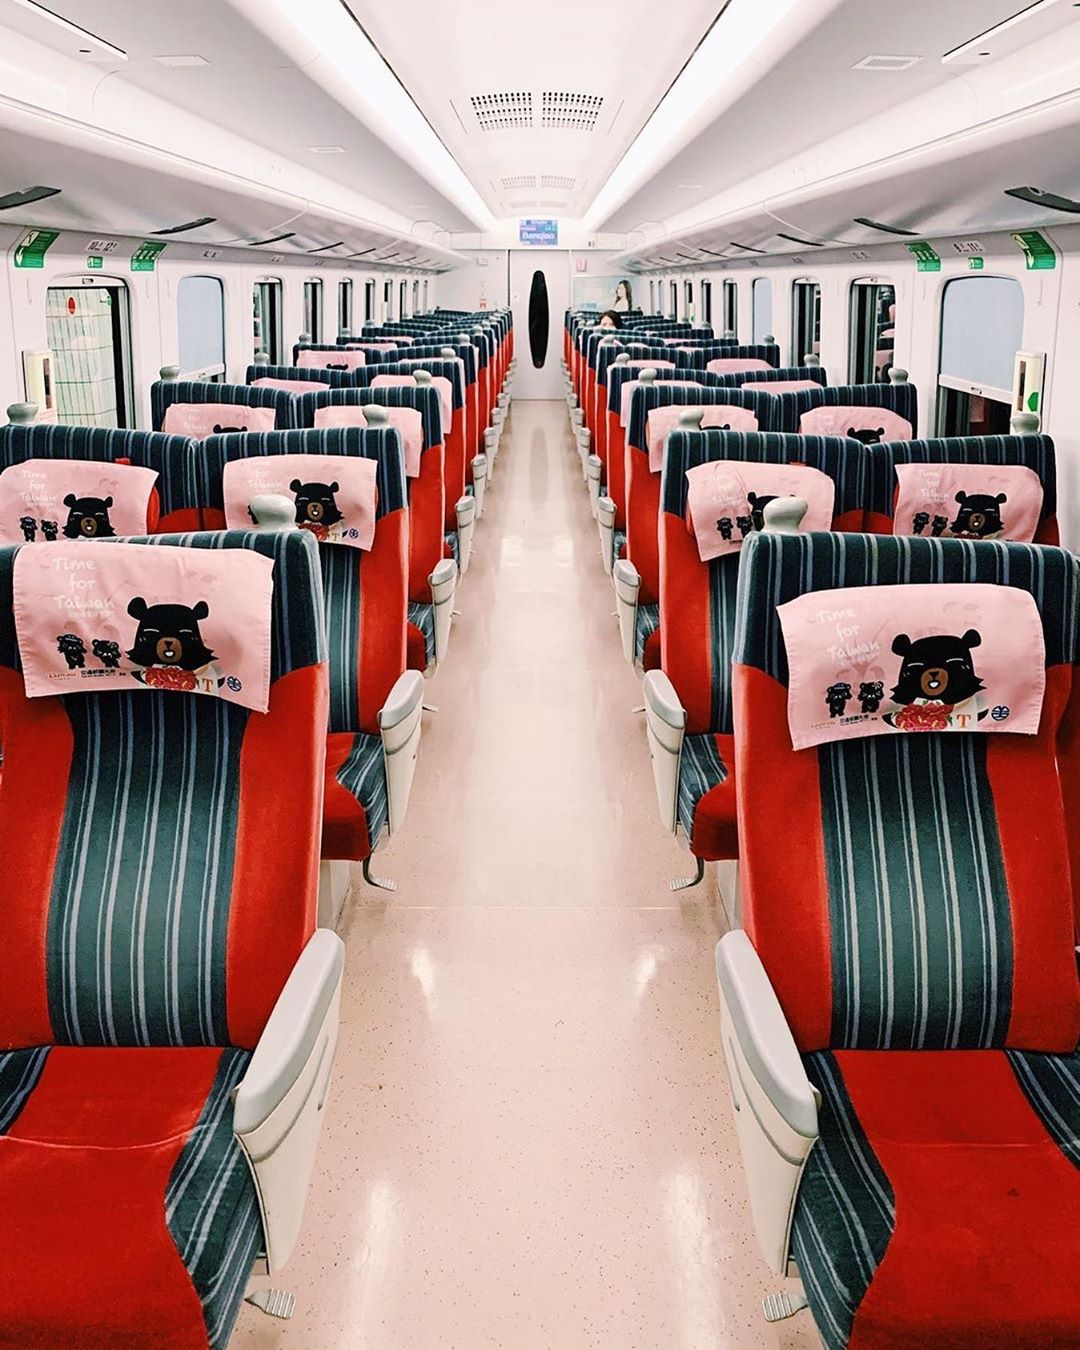 Accidentally Wes Anderson - Banqiao Station